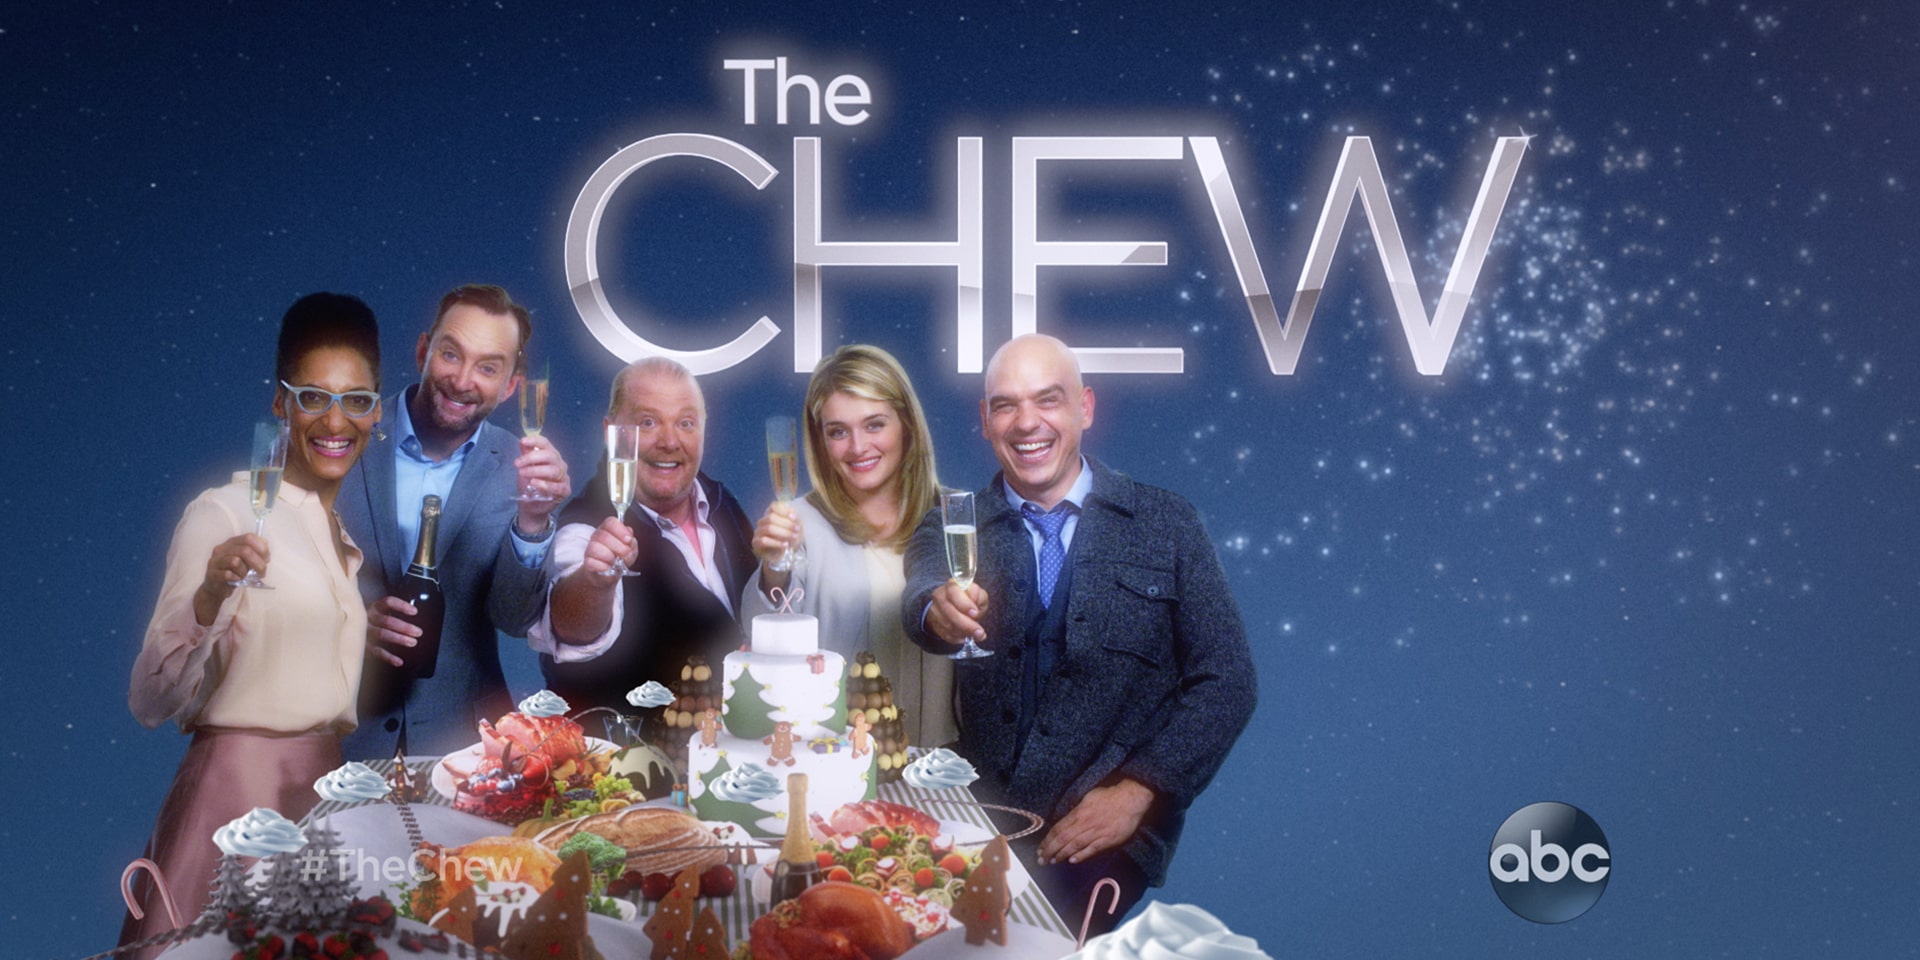 advertising abc the chew holiday 2014 promo 01